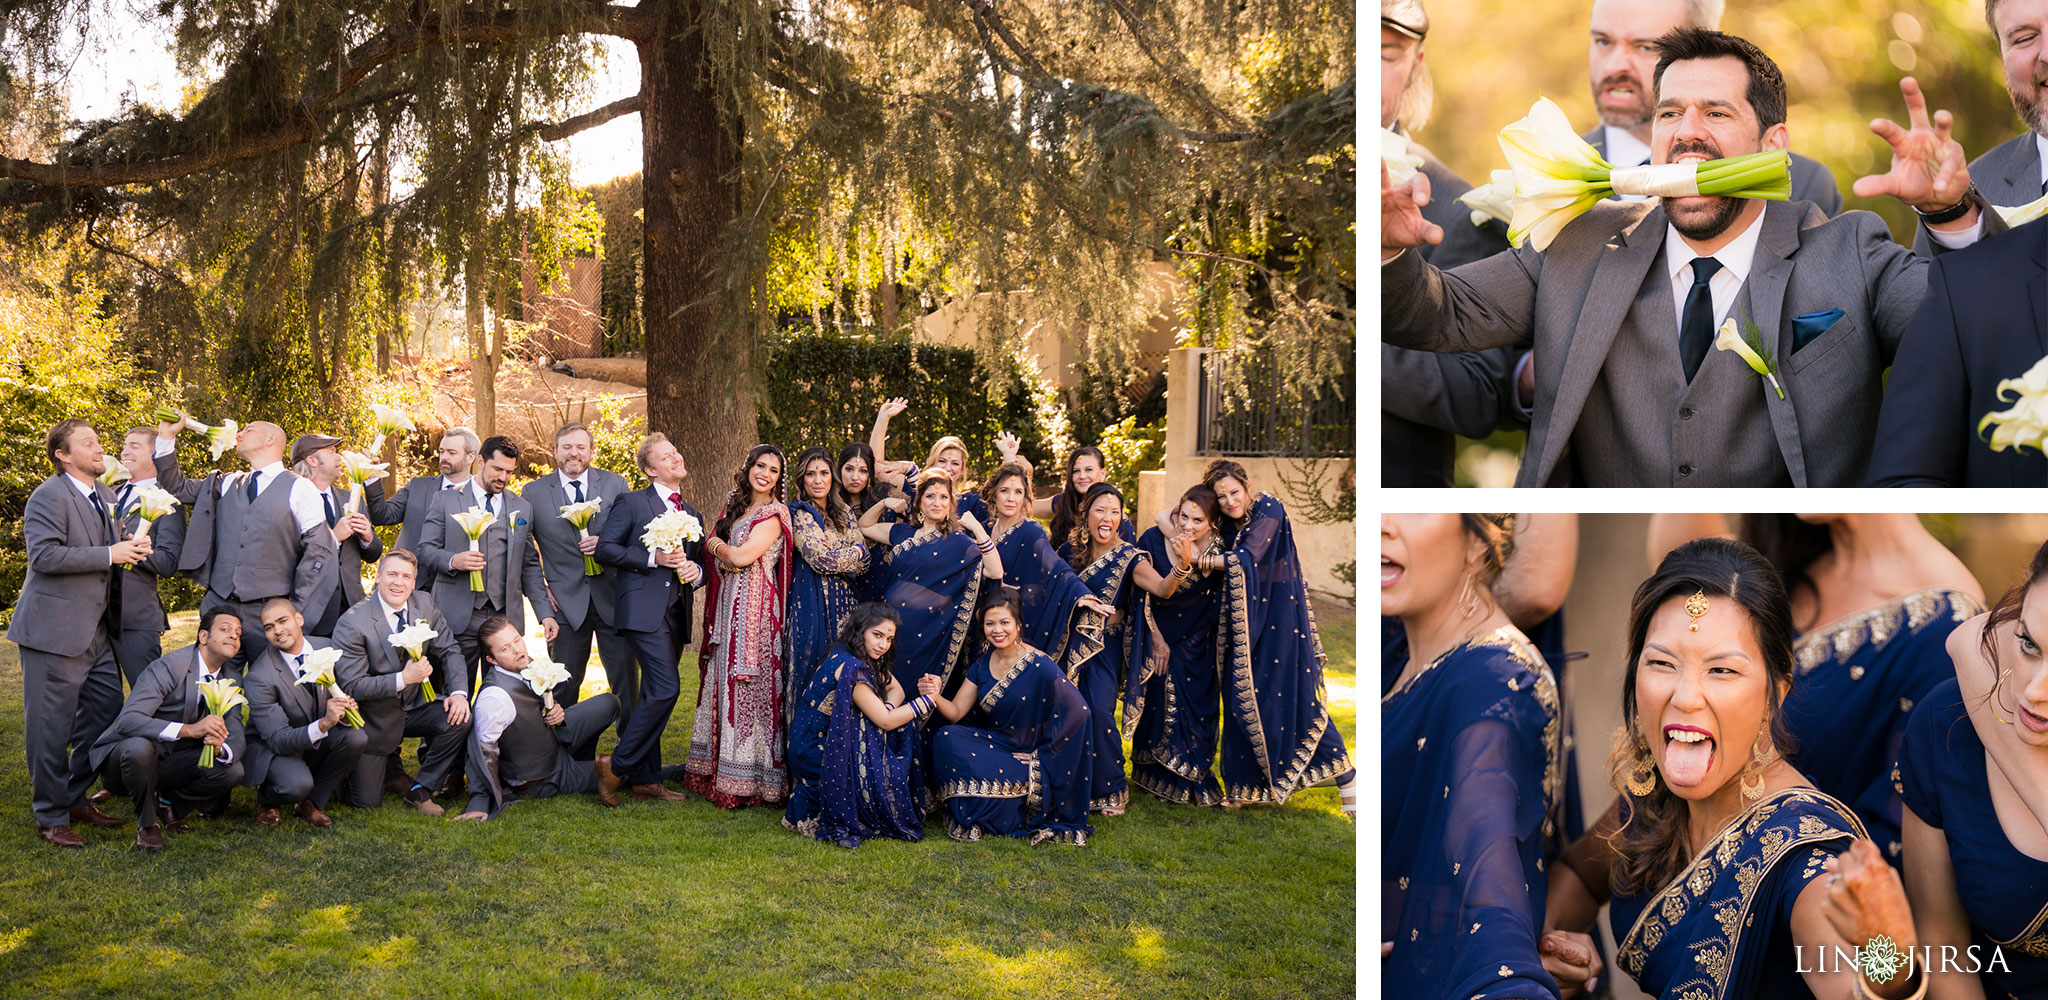 19 altadena town country club pakistani wedding party photography